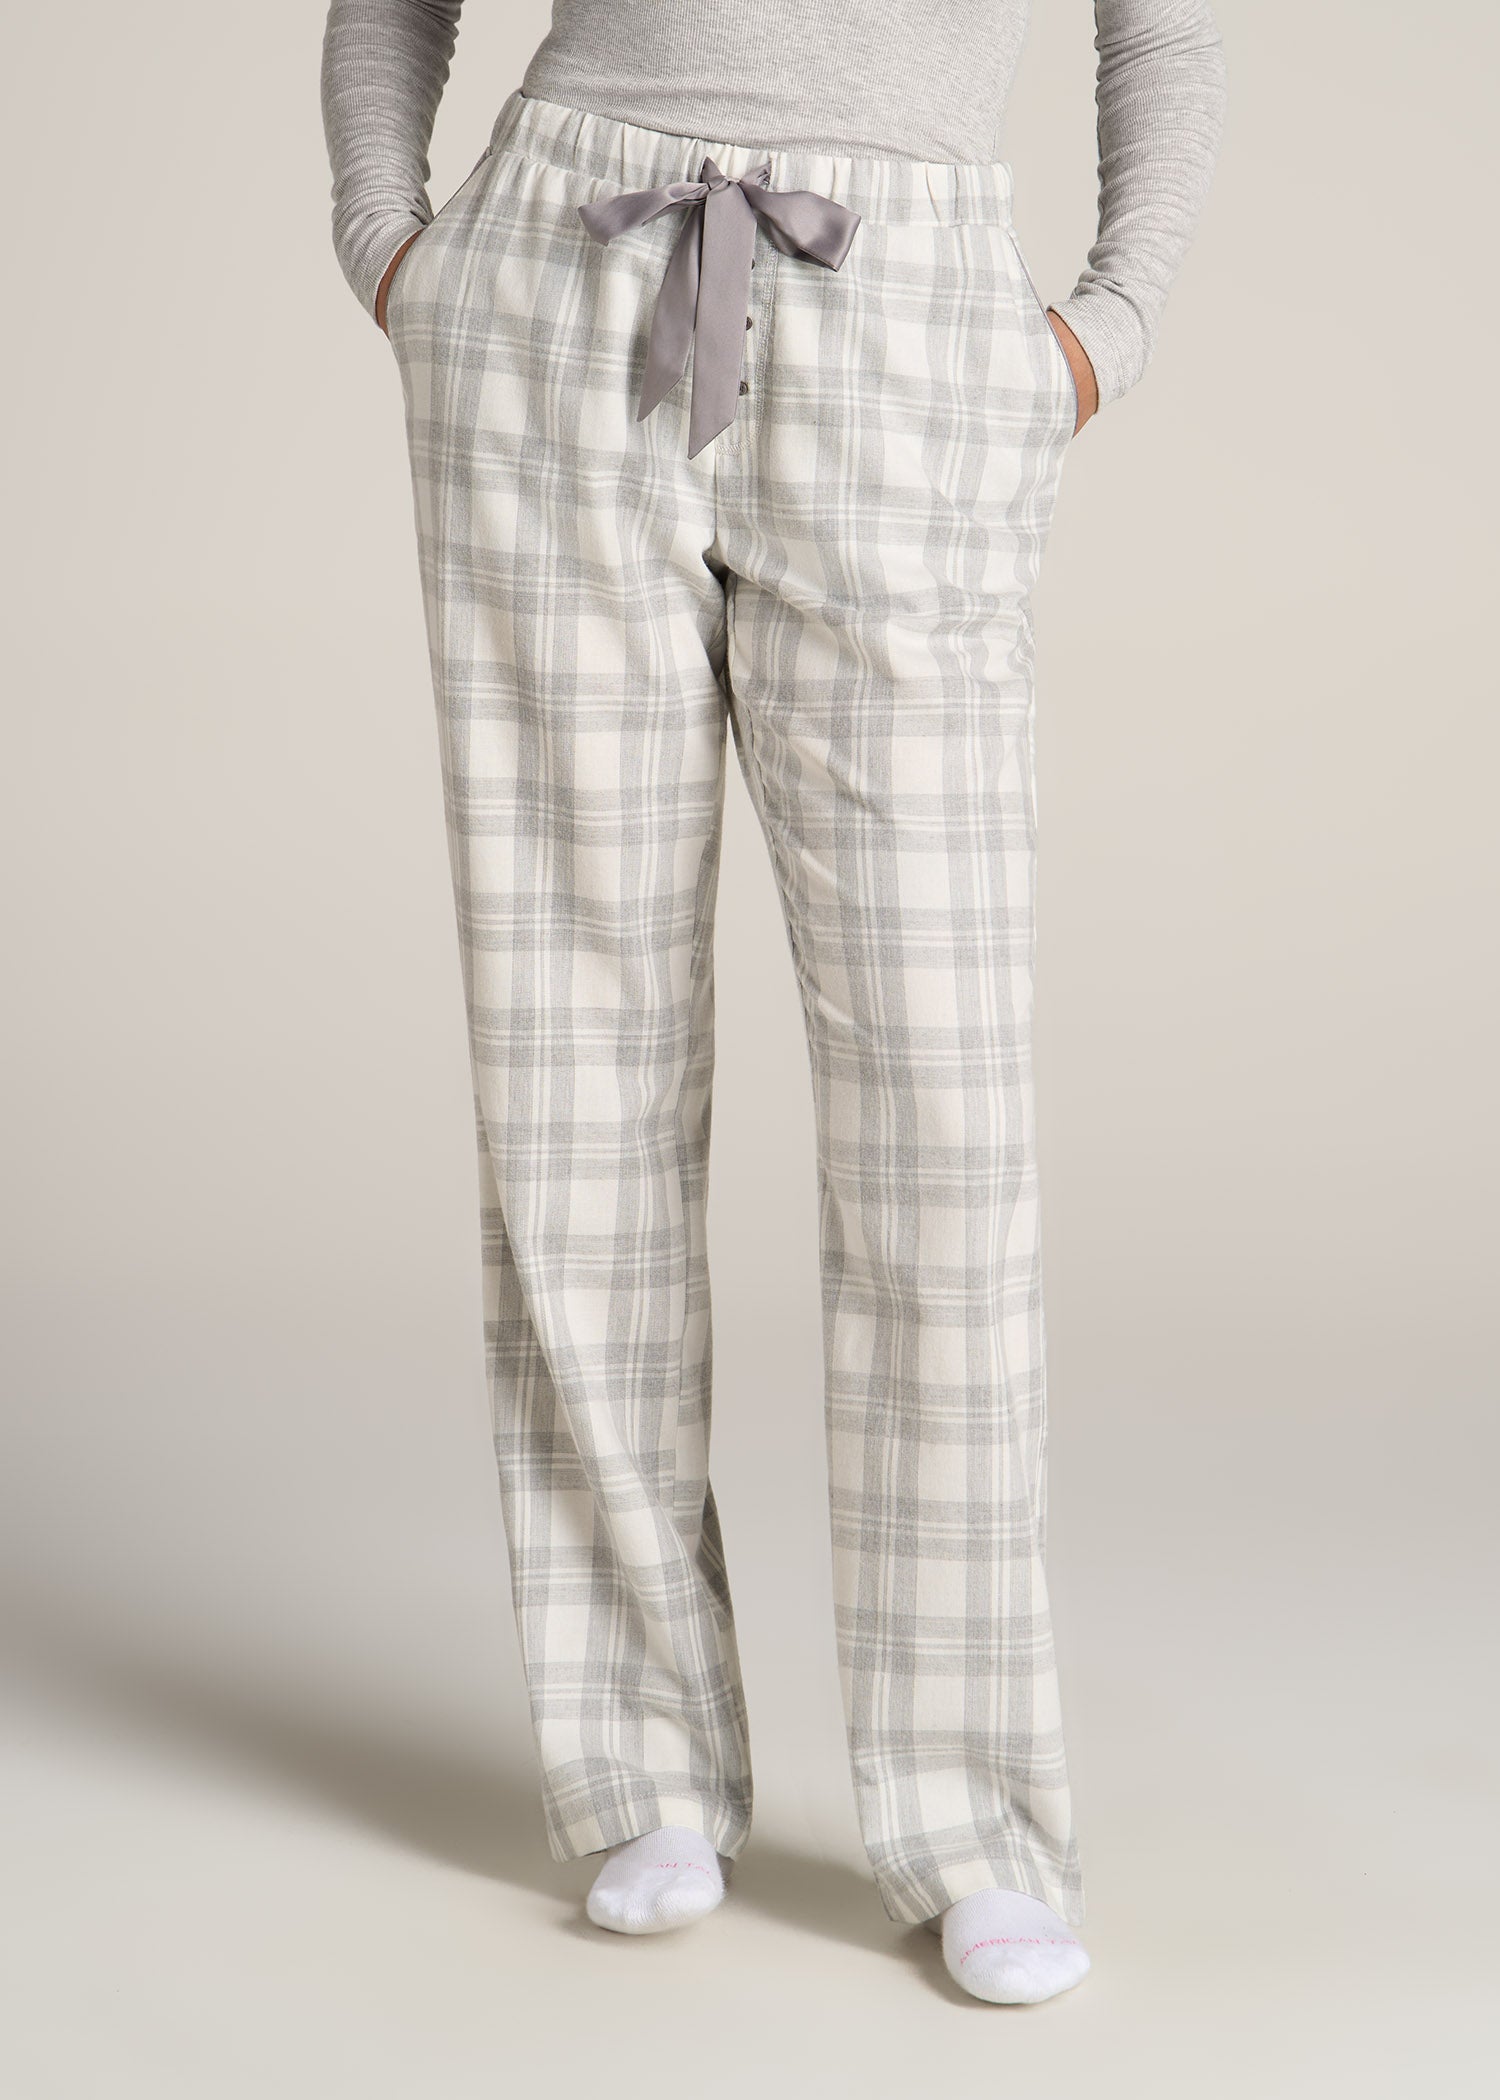 Open-Bottom Flannel Women's Tall Pajama Pants in Heather Grey and White  Plaid